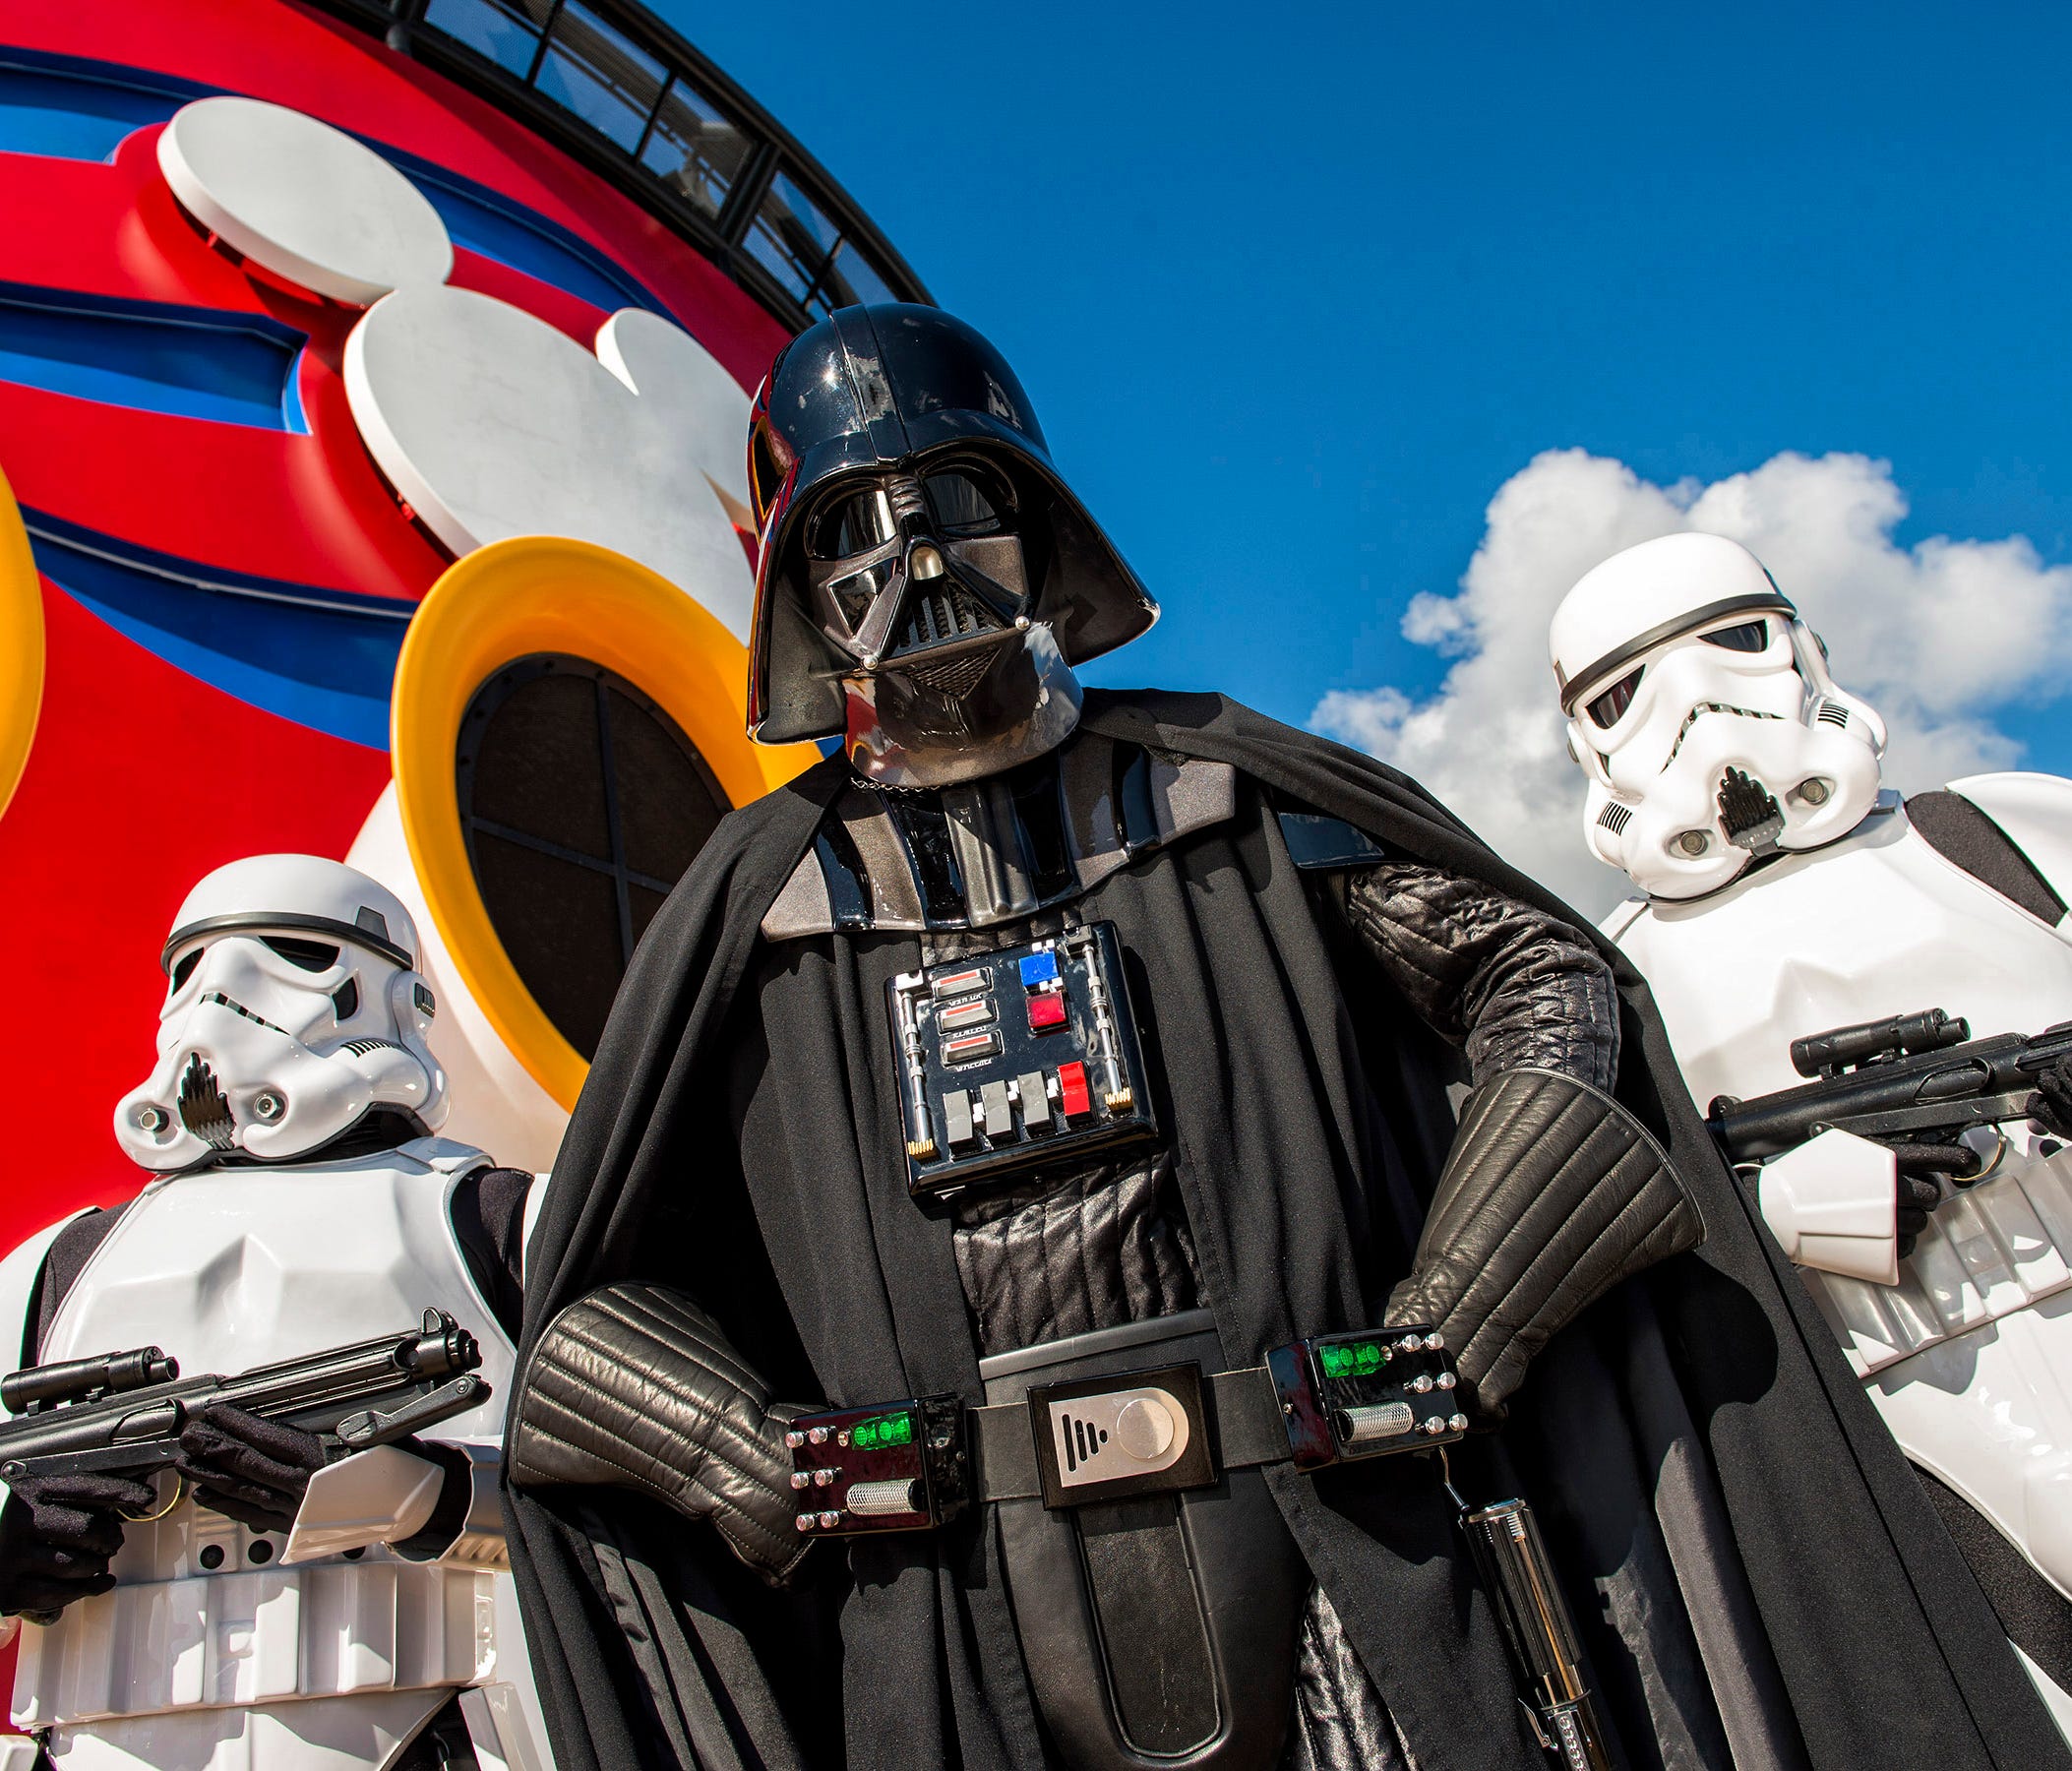 Star Wars-themed days will return to Disney Fantasy sailings in 2018.